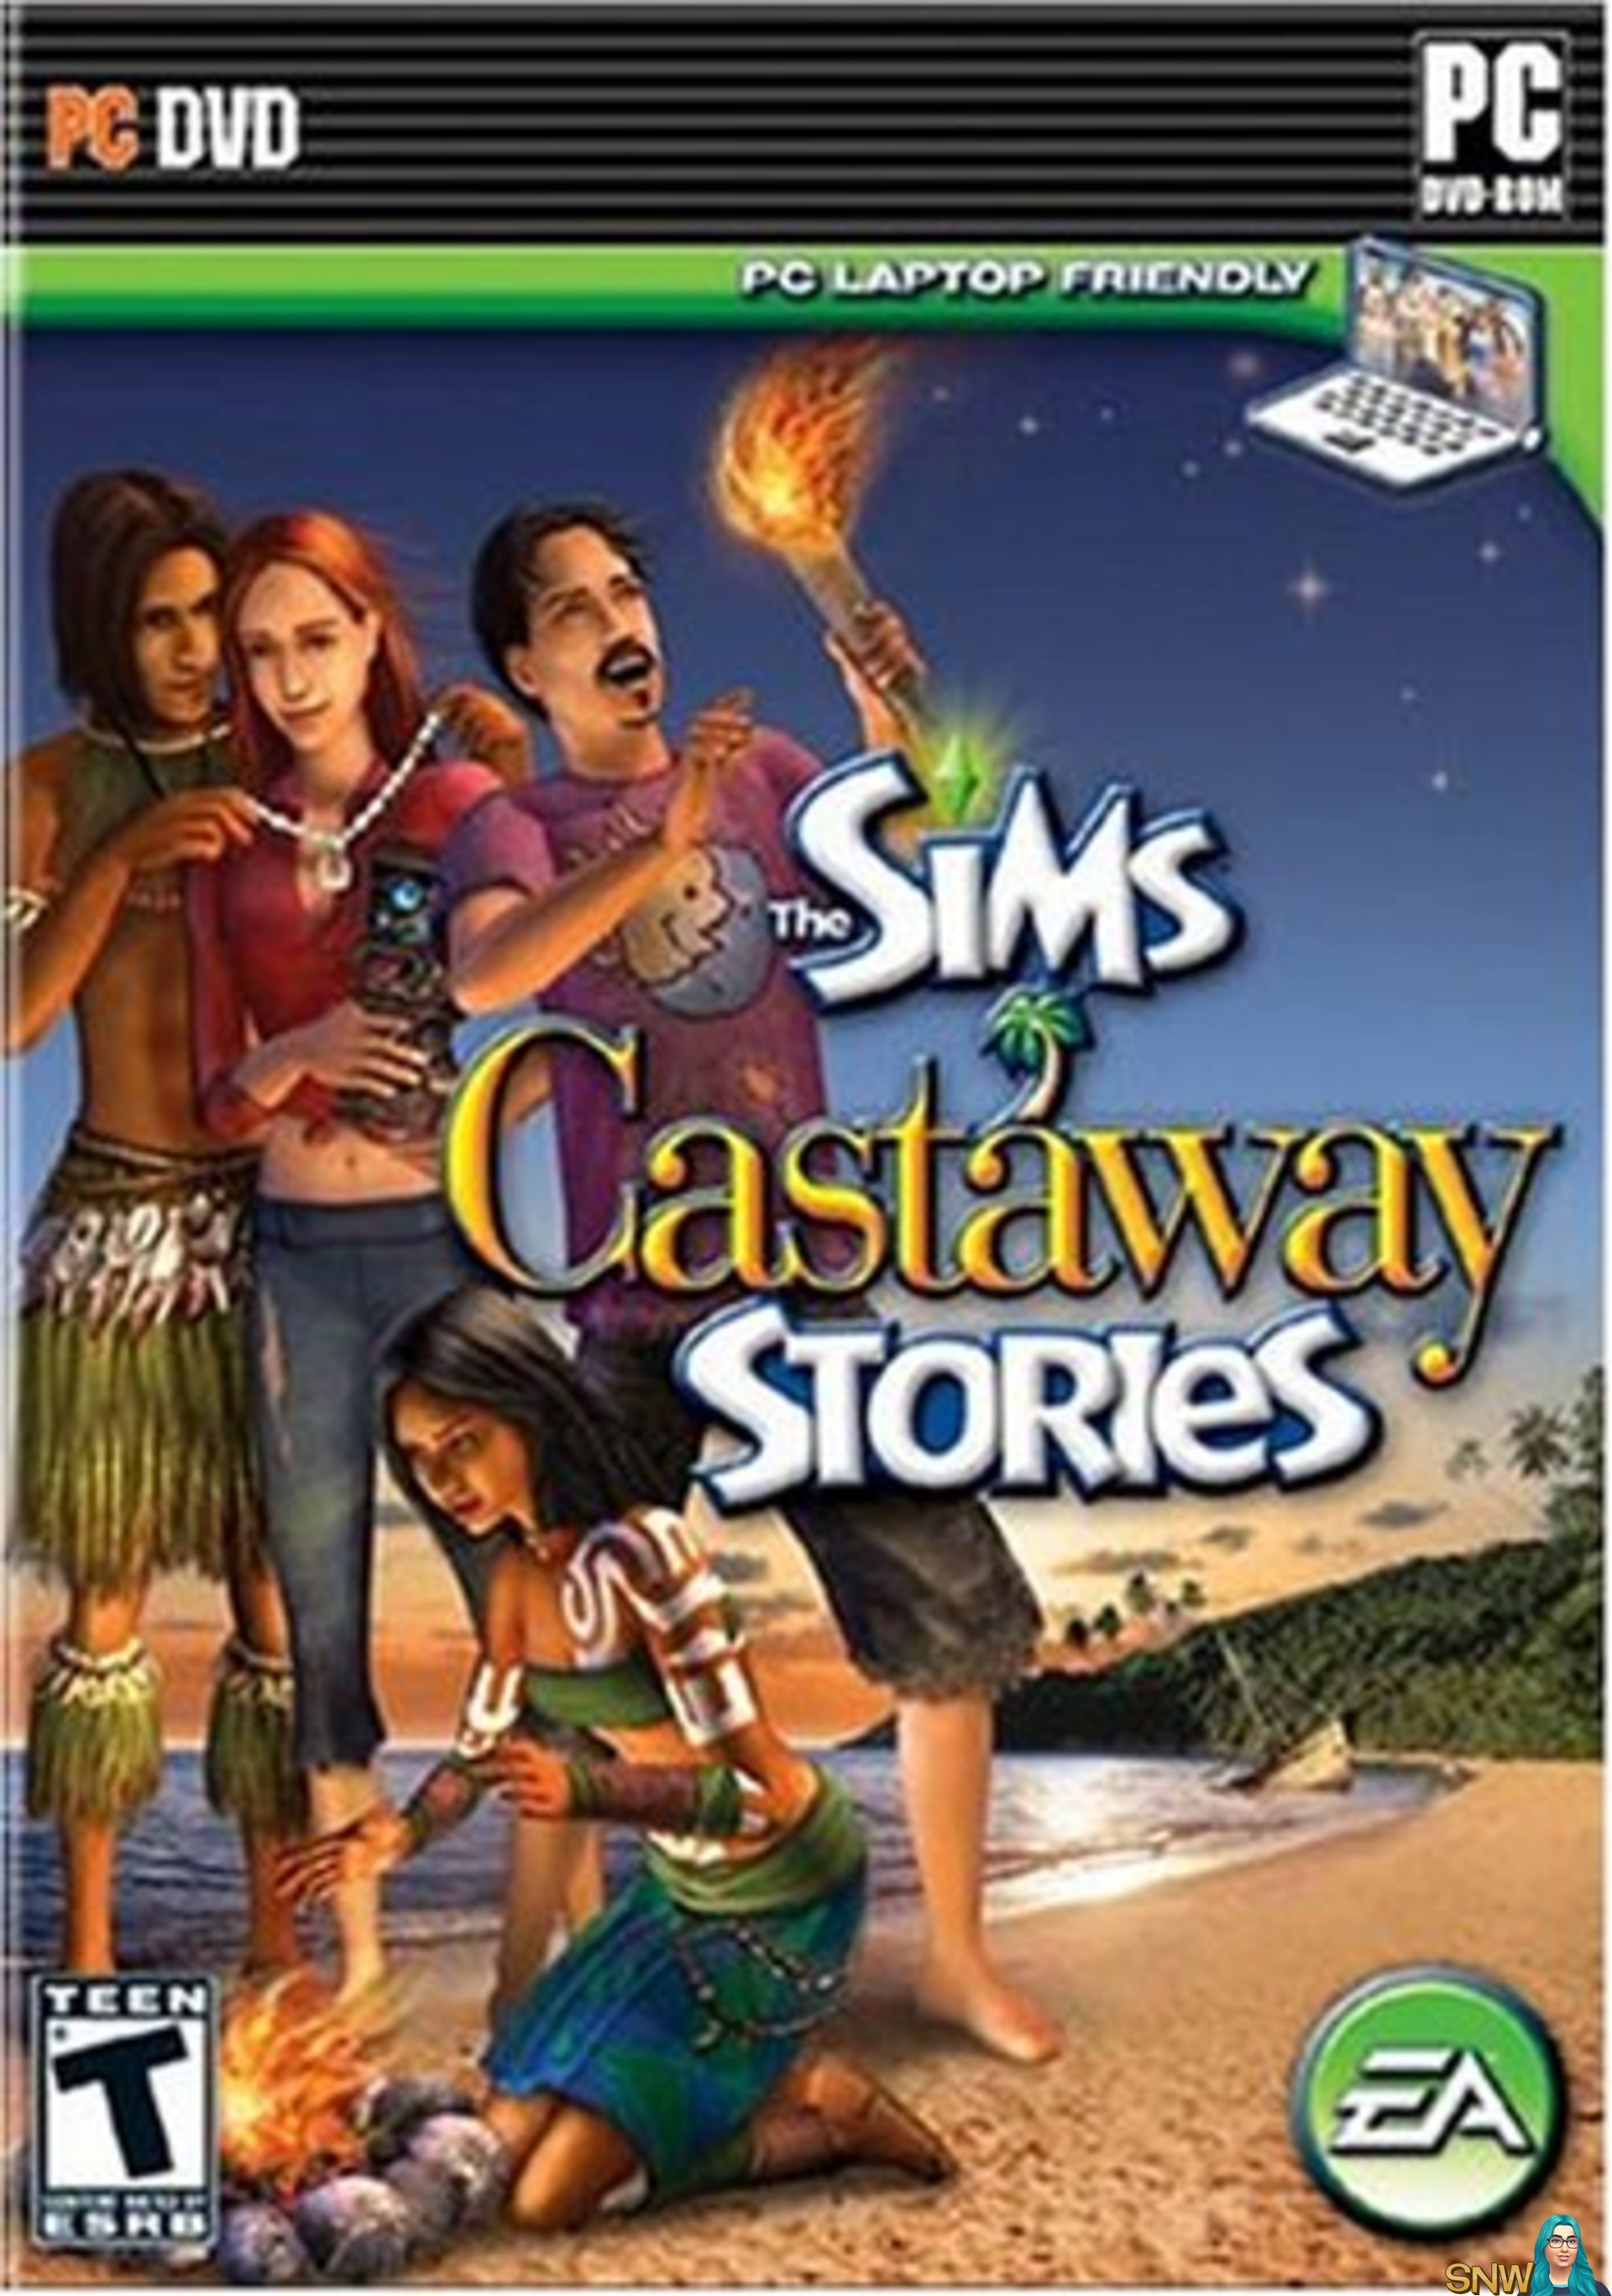 how many islands are there in the sims 2 castaway